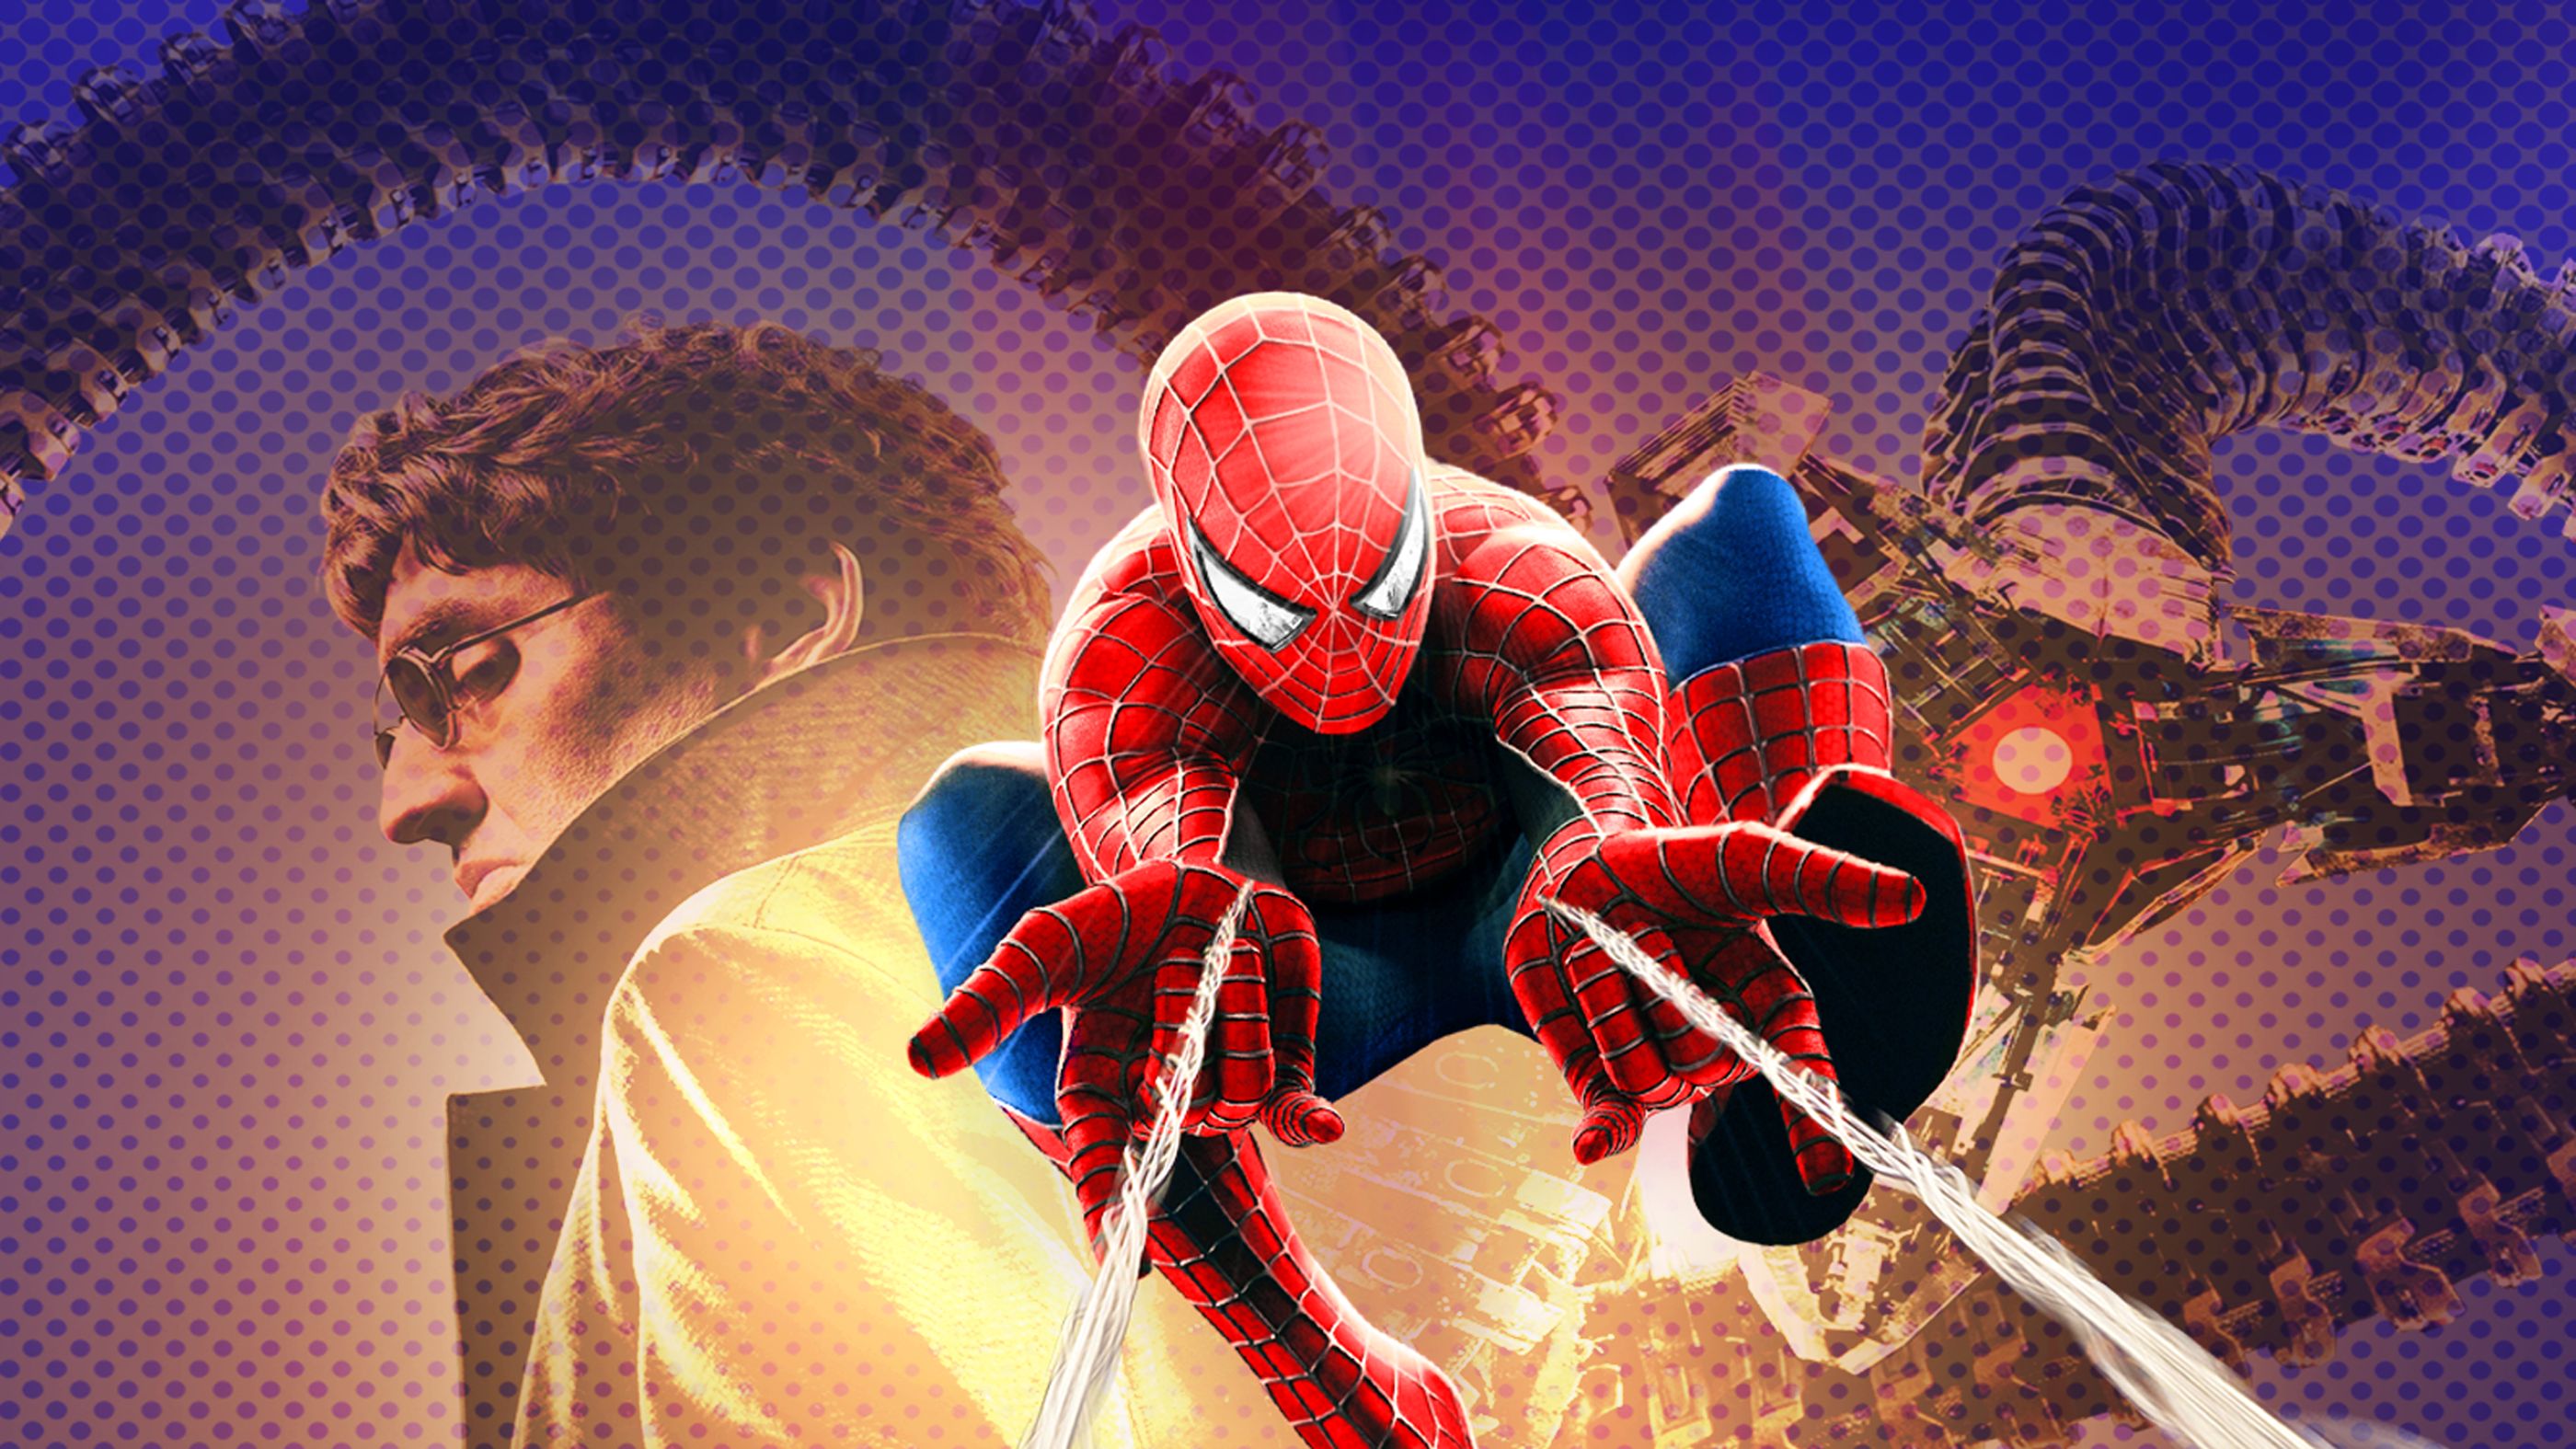 Spider-Man 2 (2004) Review